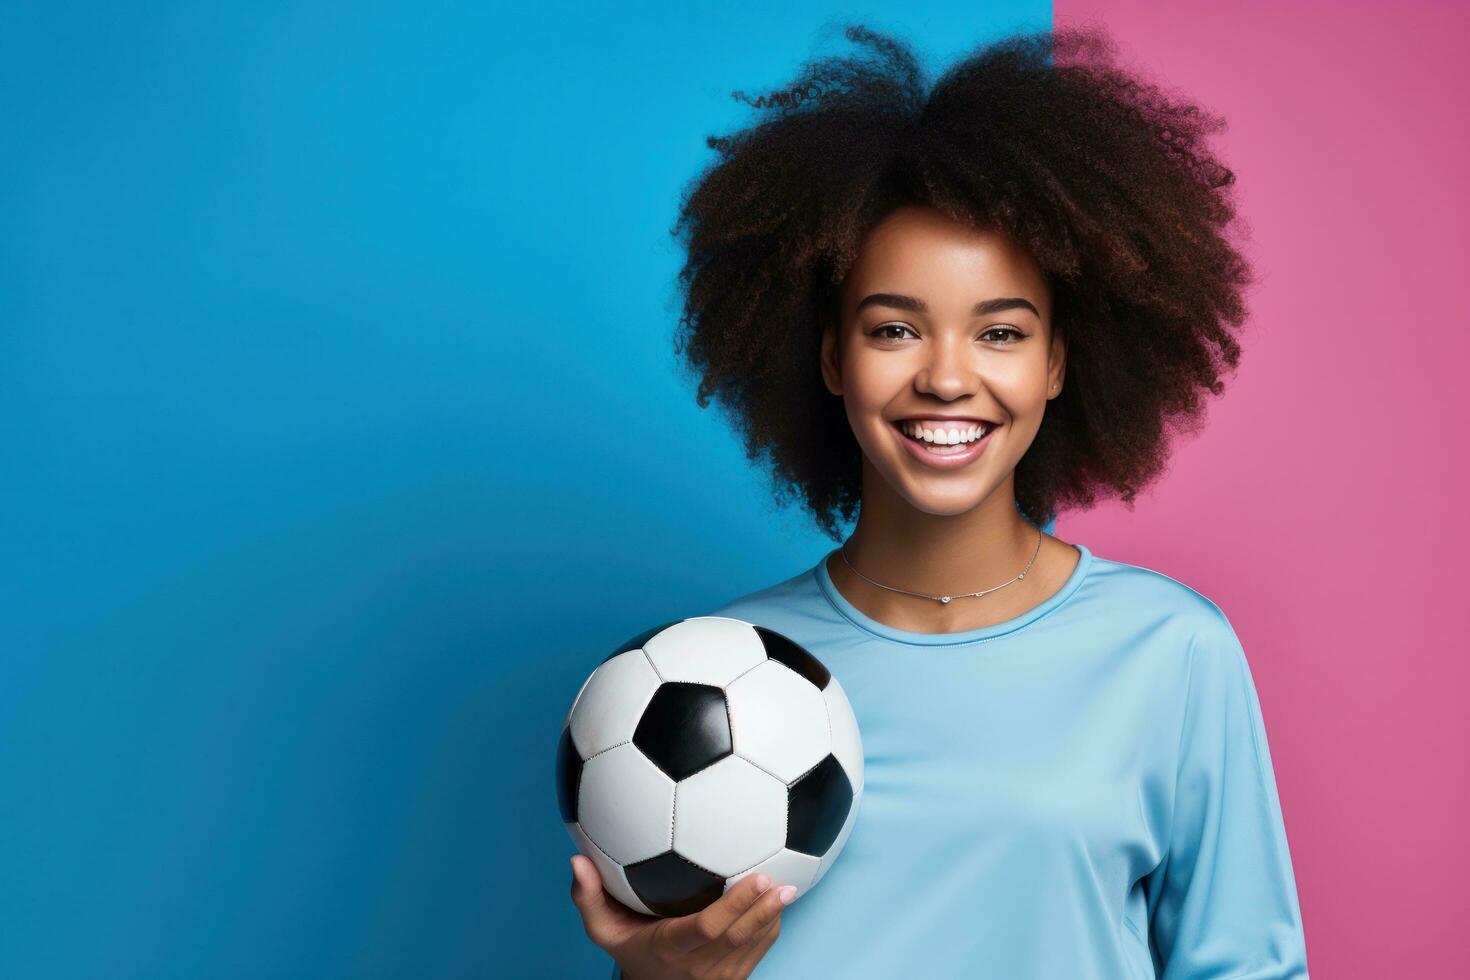 Girl with soccer ball photo